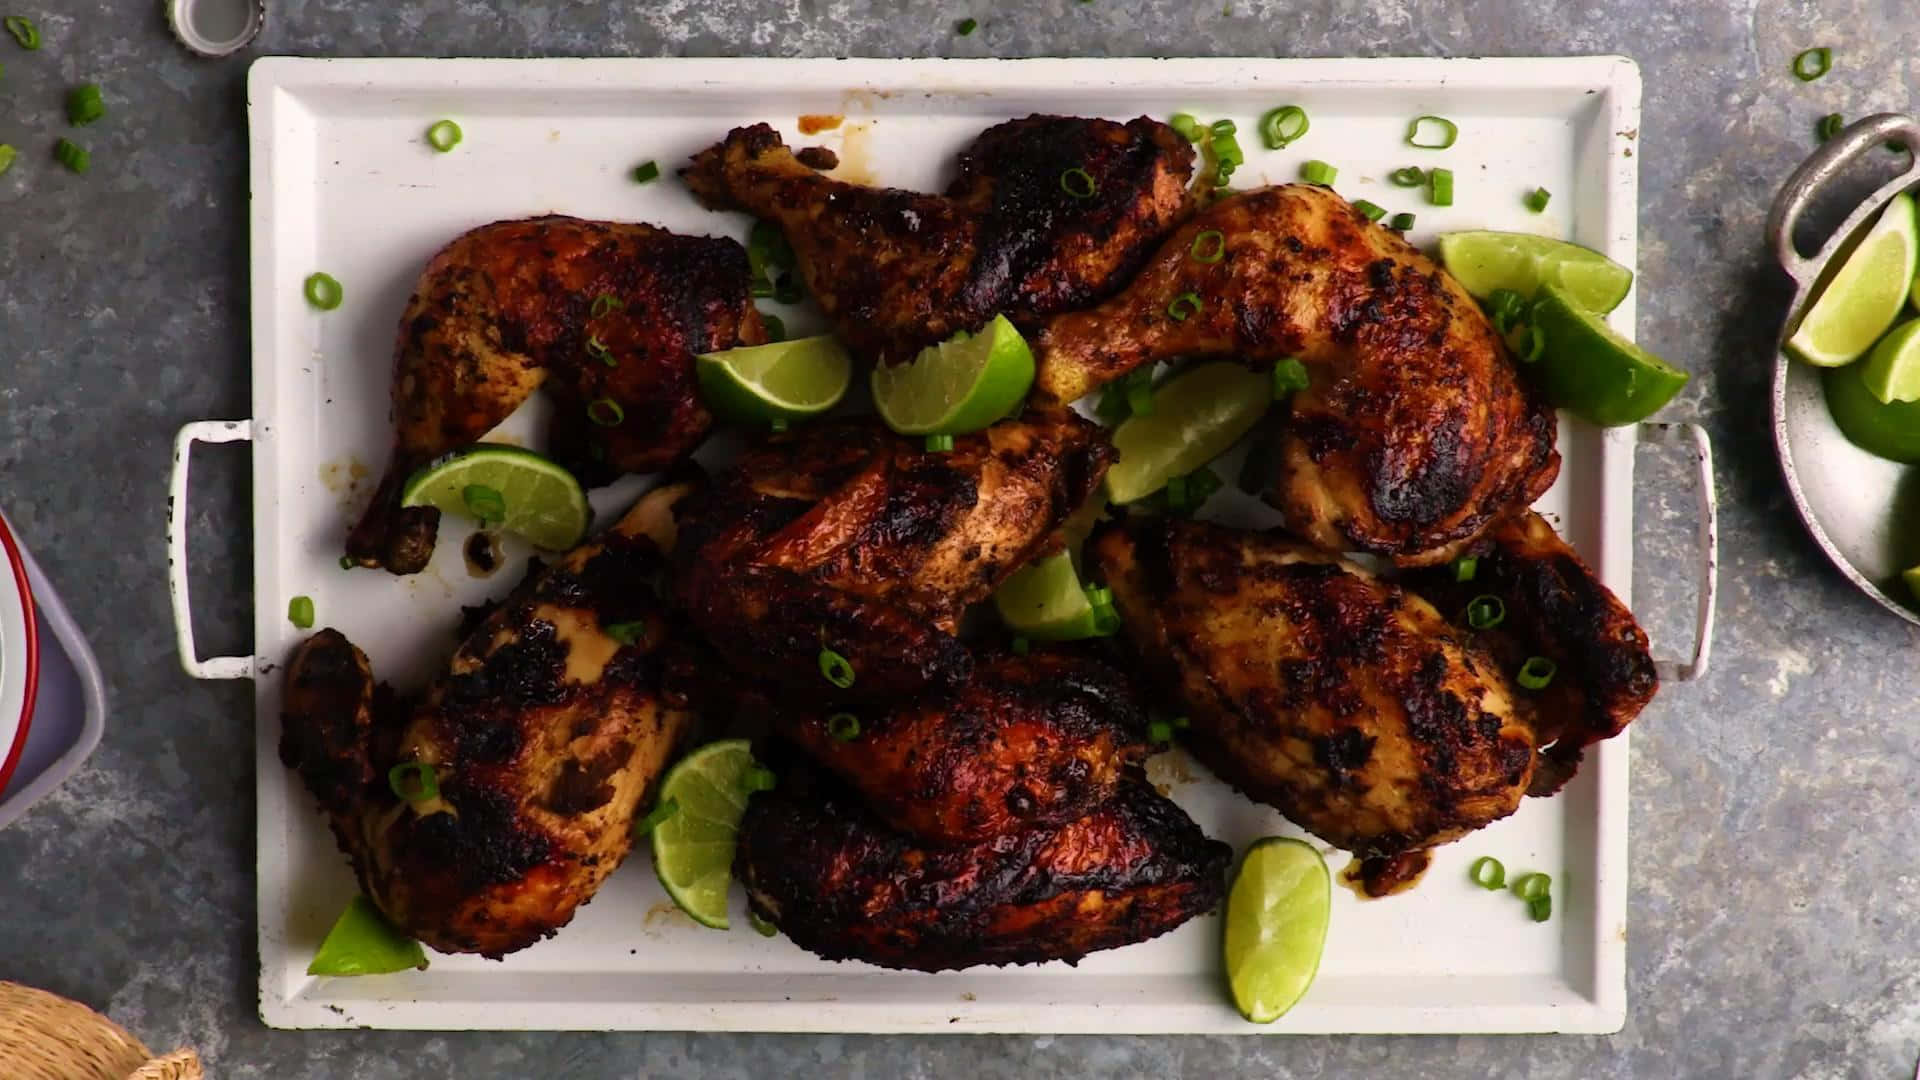 Try this Delicious Blackened Chicken Recipe! Wallpaper